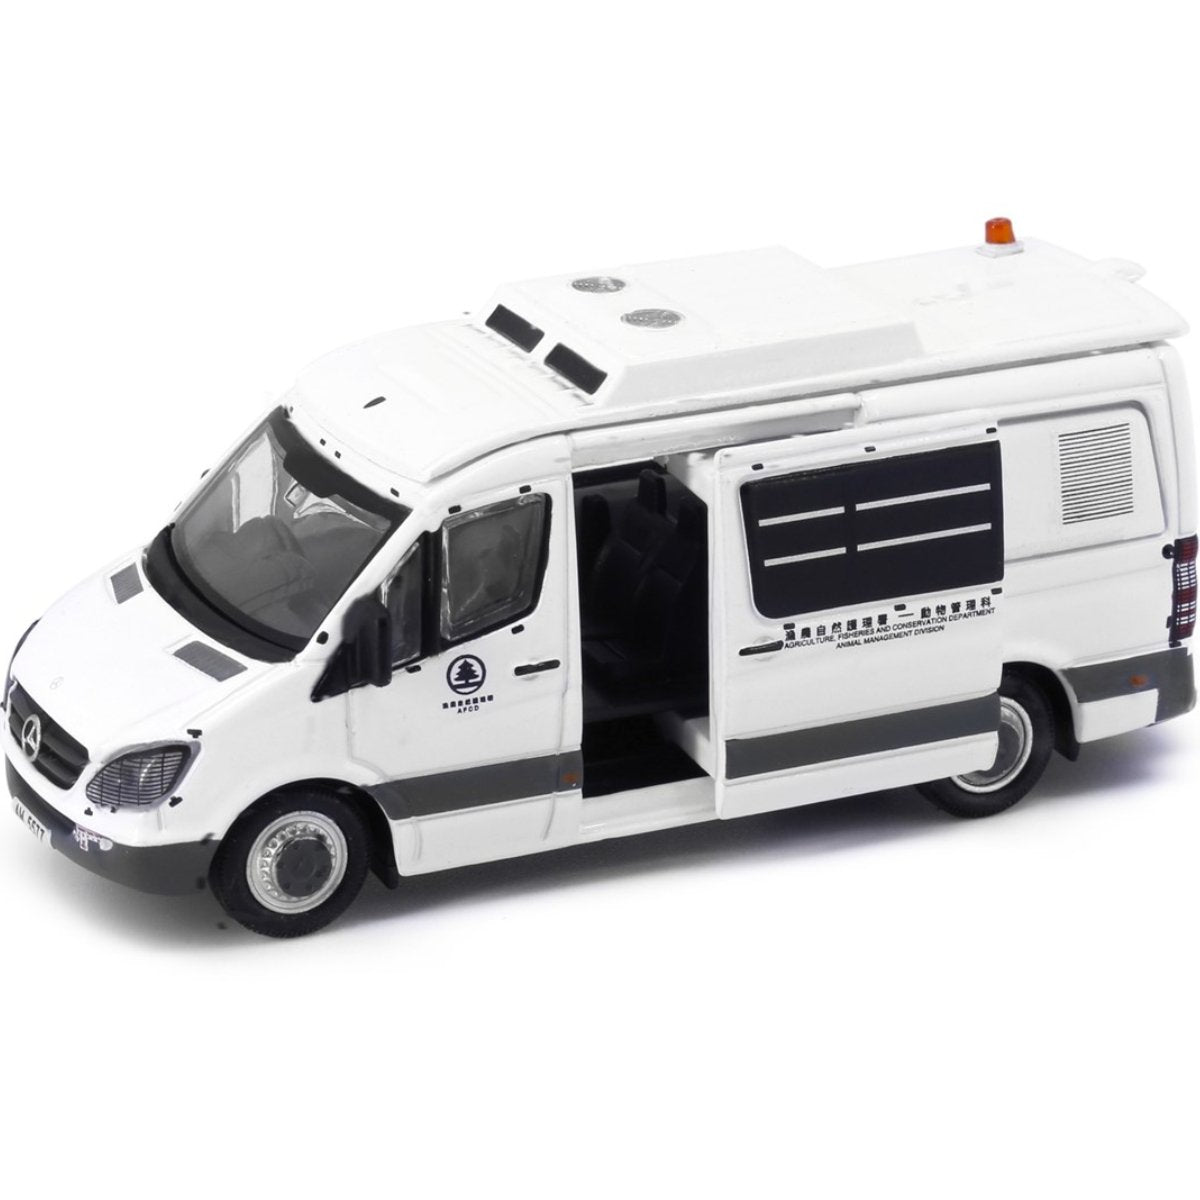 Tiny Models Mercedes-Benz Sprinter AFCD White (1:76 Scale) - Phillips Hobbies